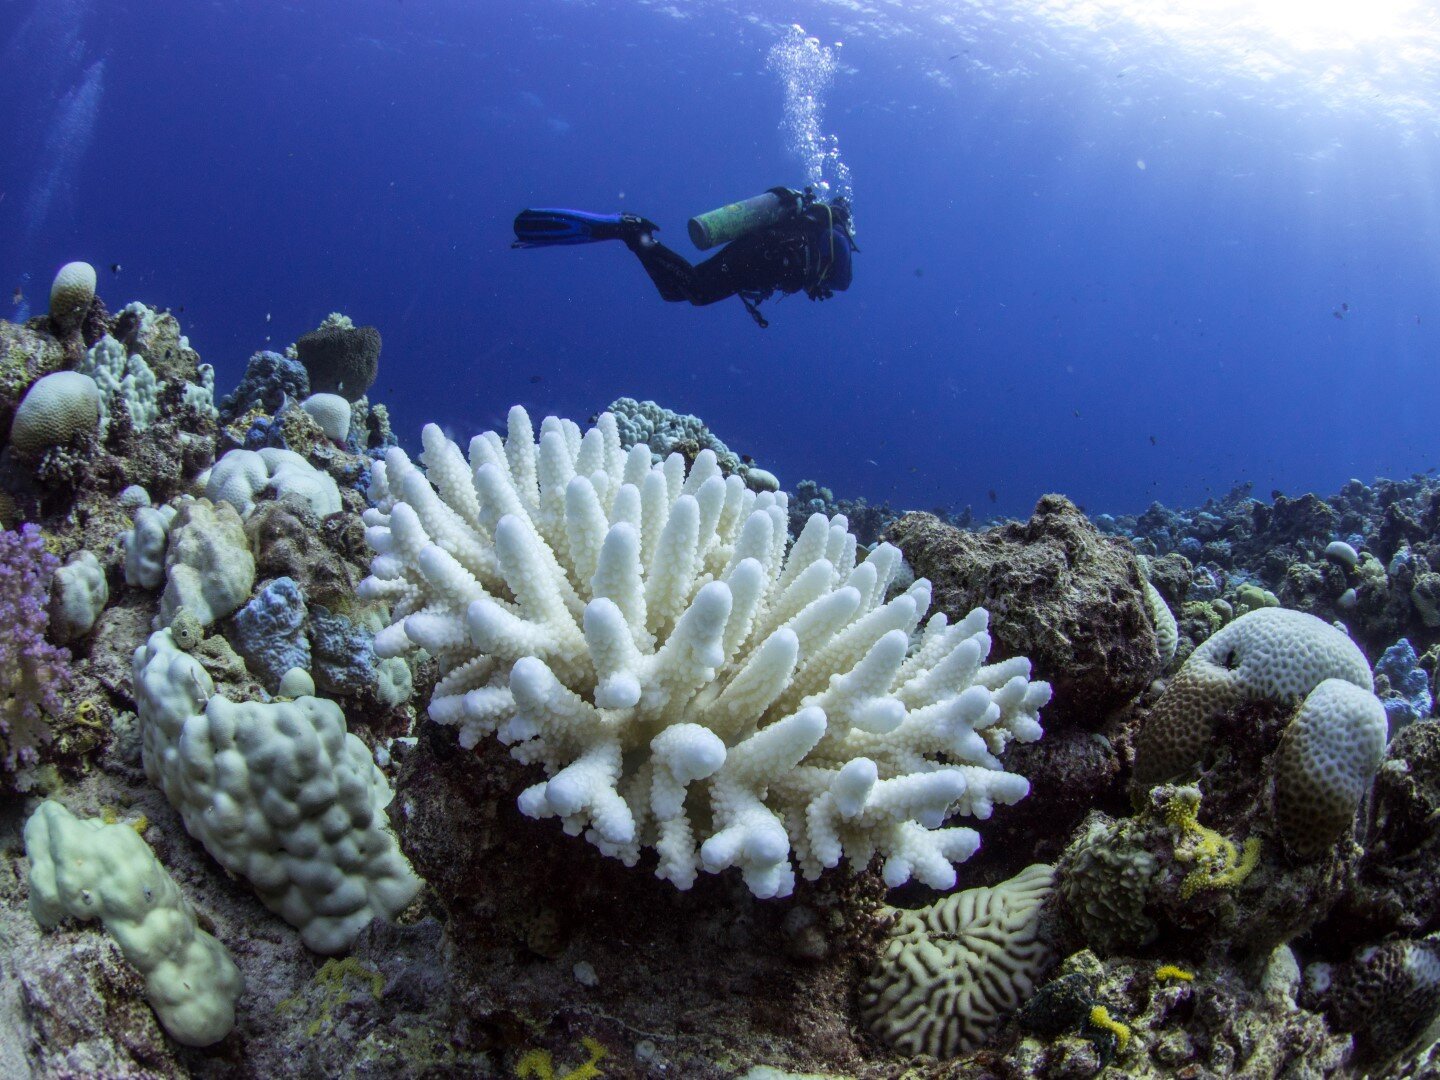 Scientists organize to tackle crisis of coral bleaching